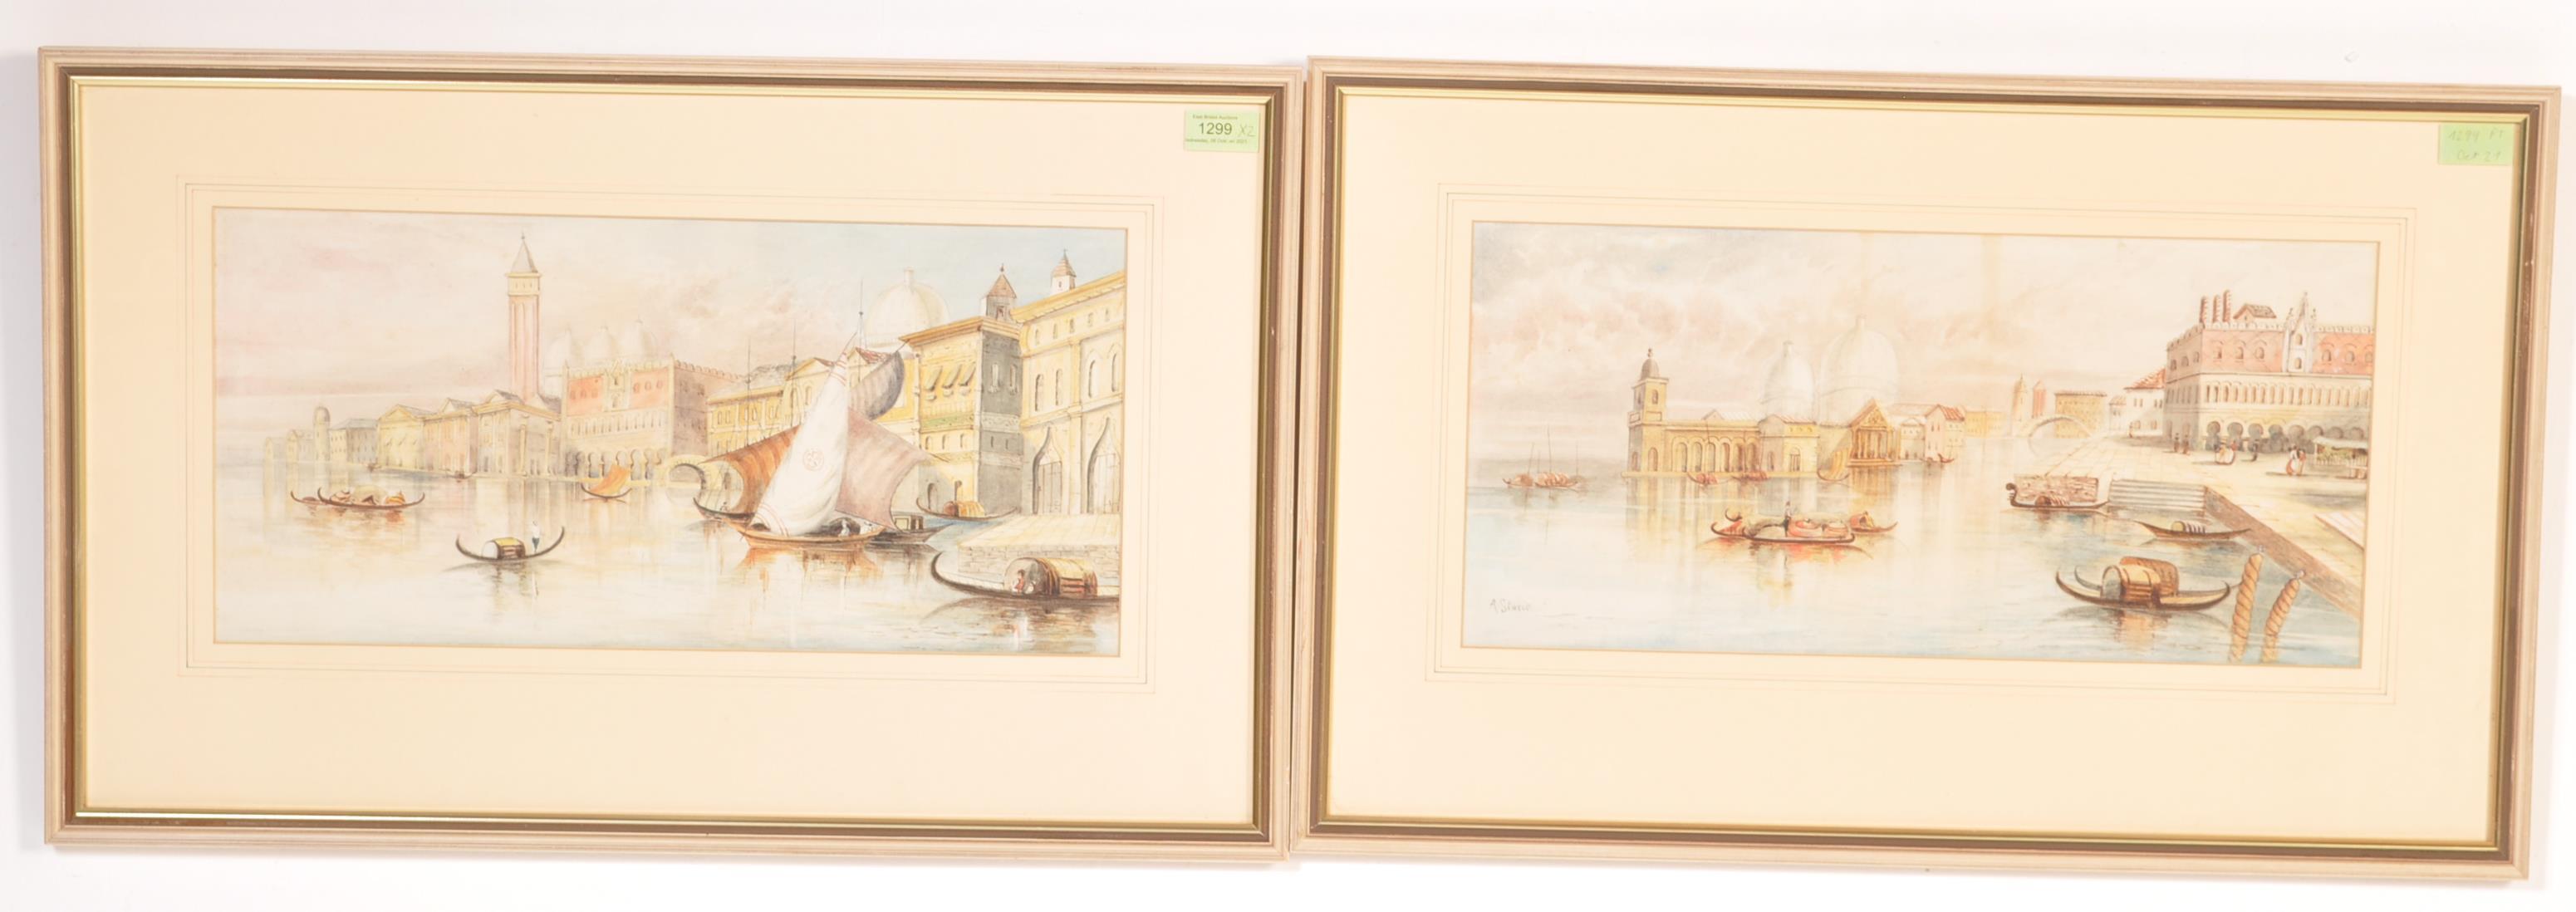 TWO VIENNESE WATERCOLOUR PAINTINGS BY A. STORIE